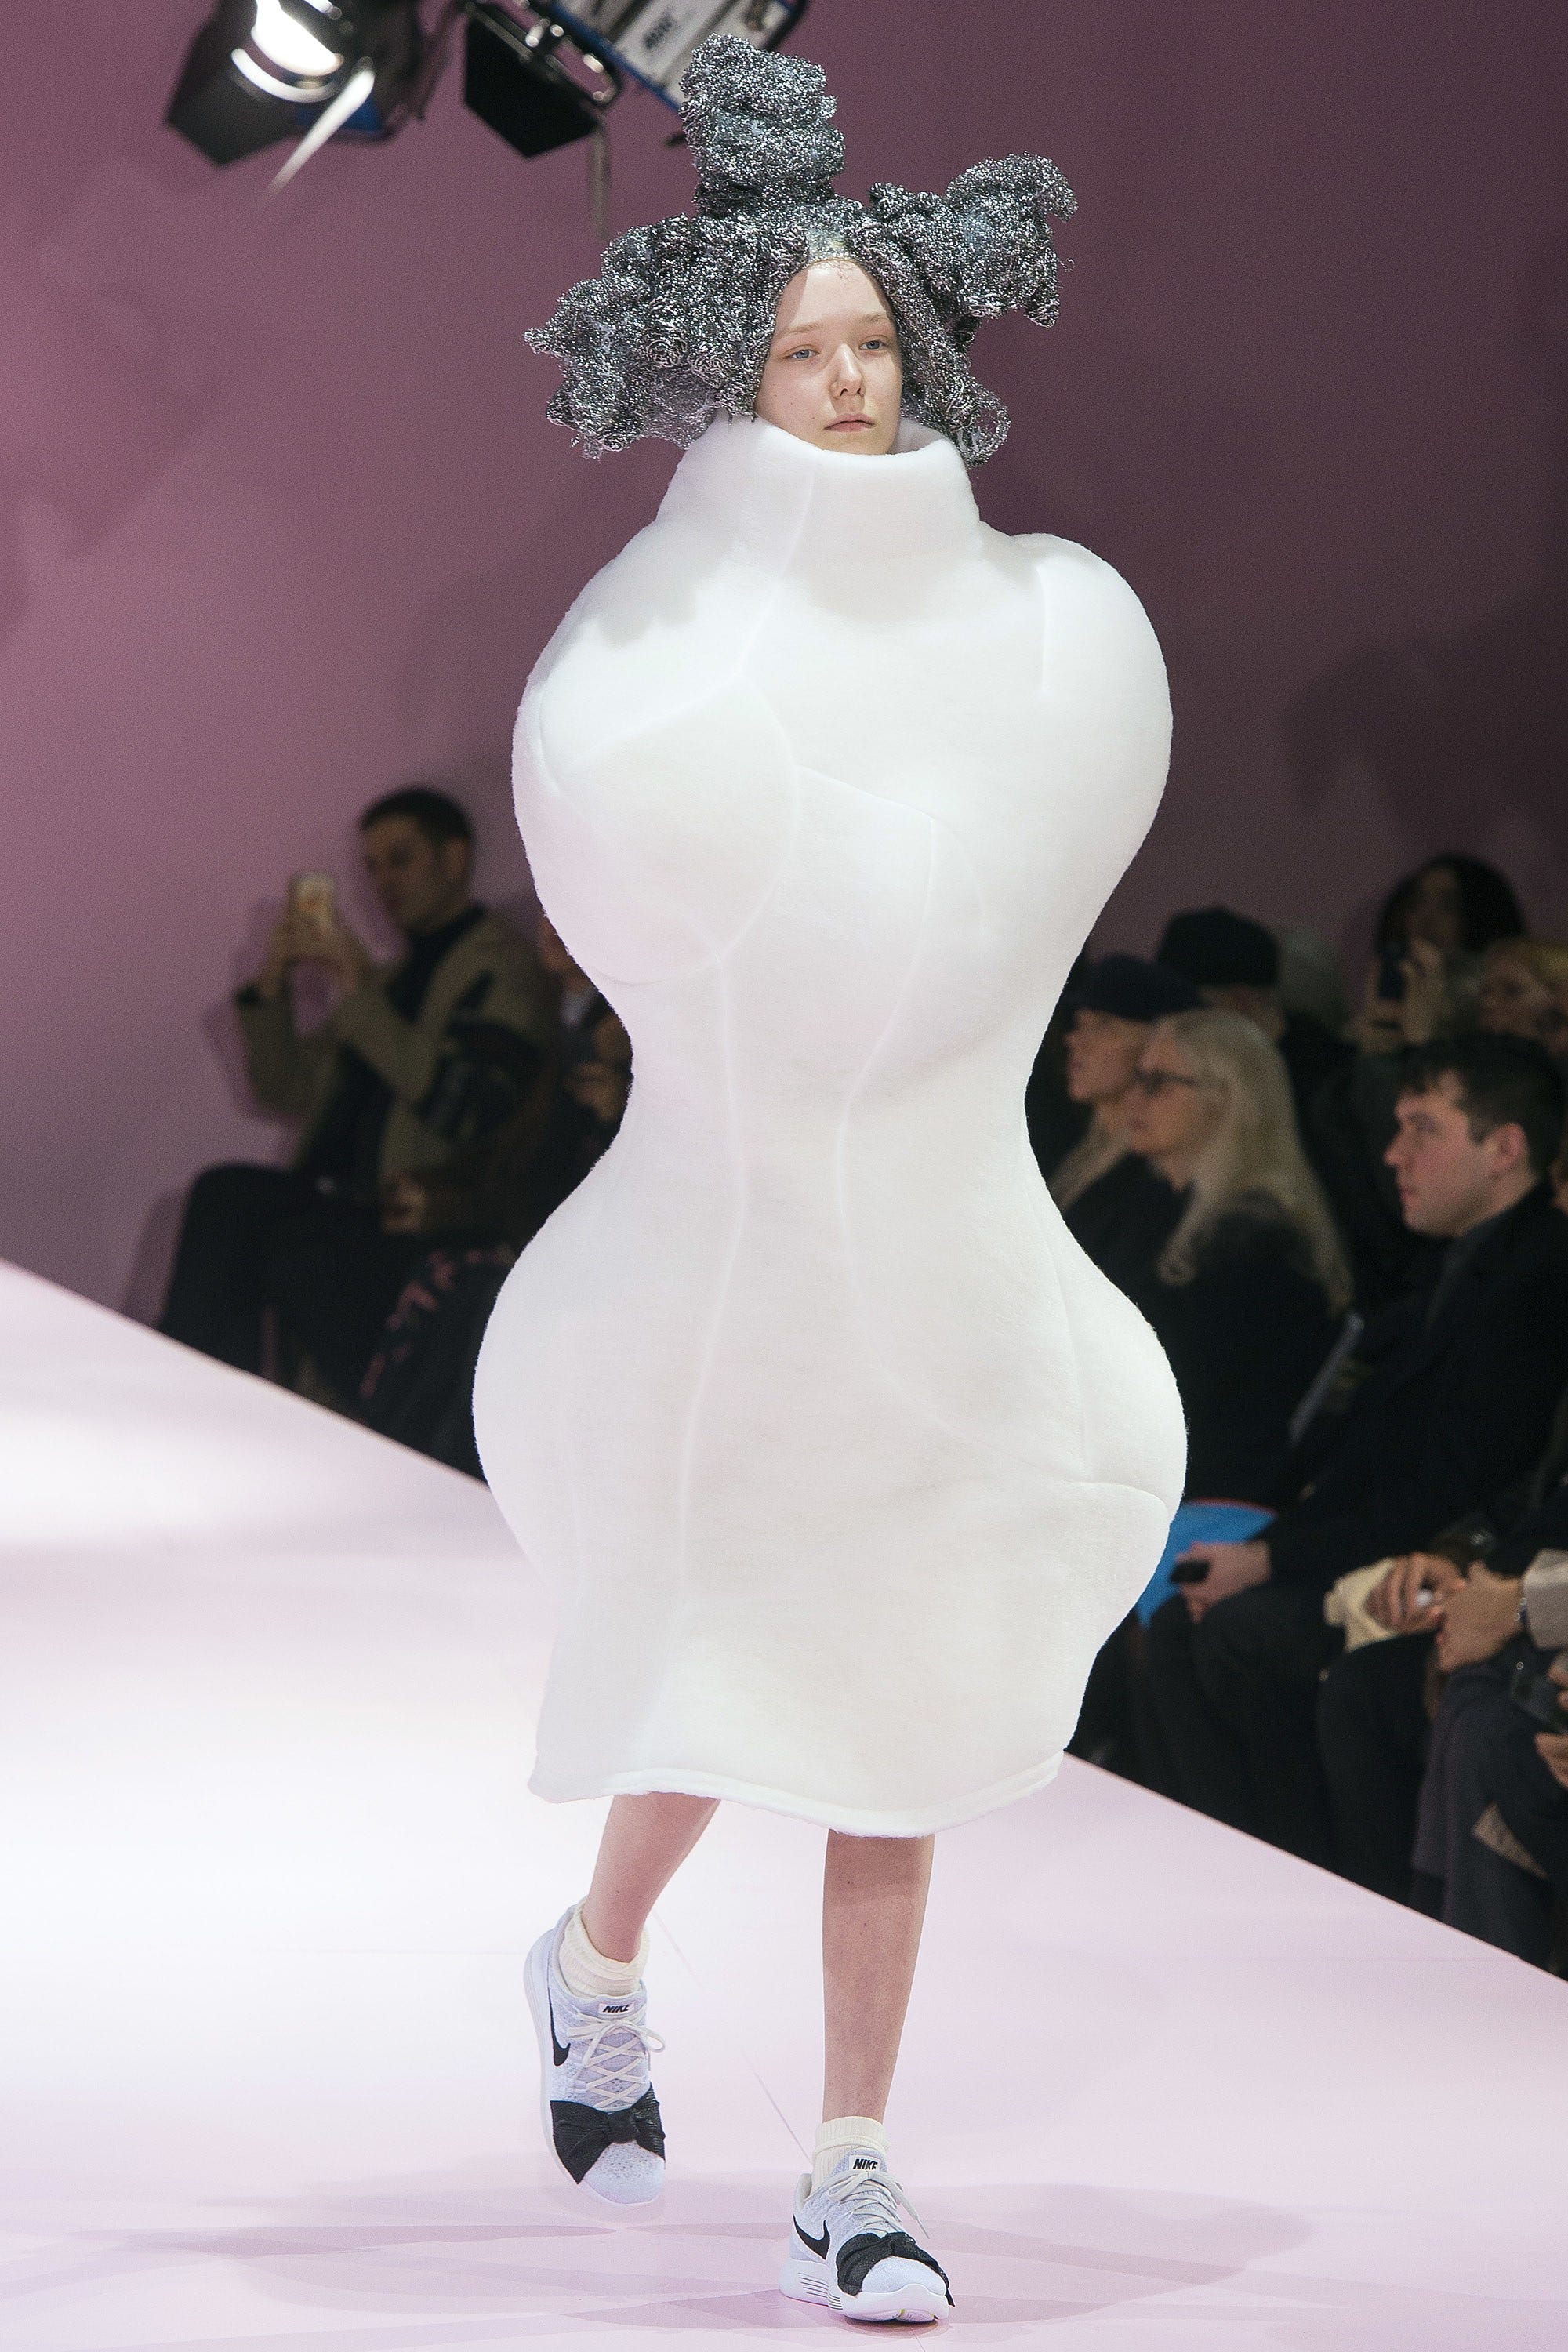 Why are Fashion shows filled with unwearable garments? | by Renaud ...